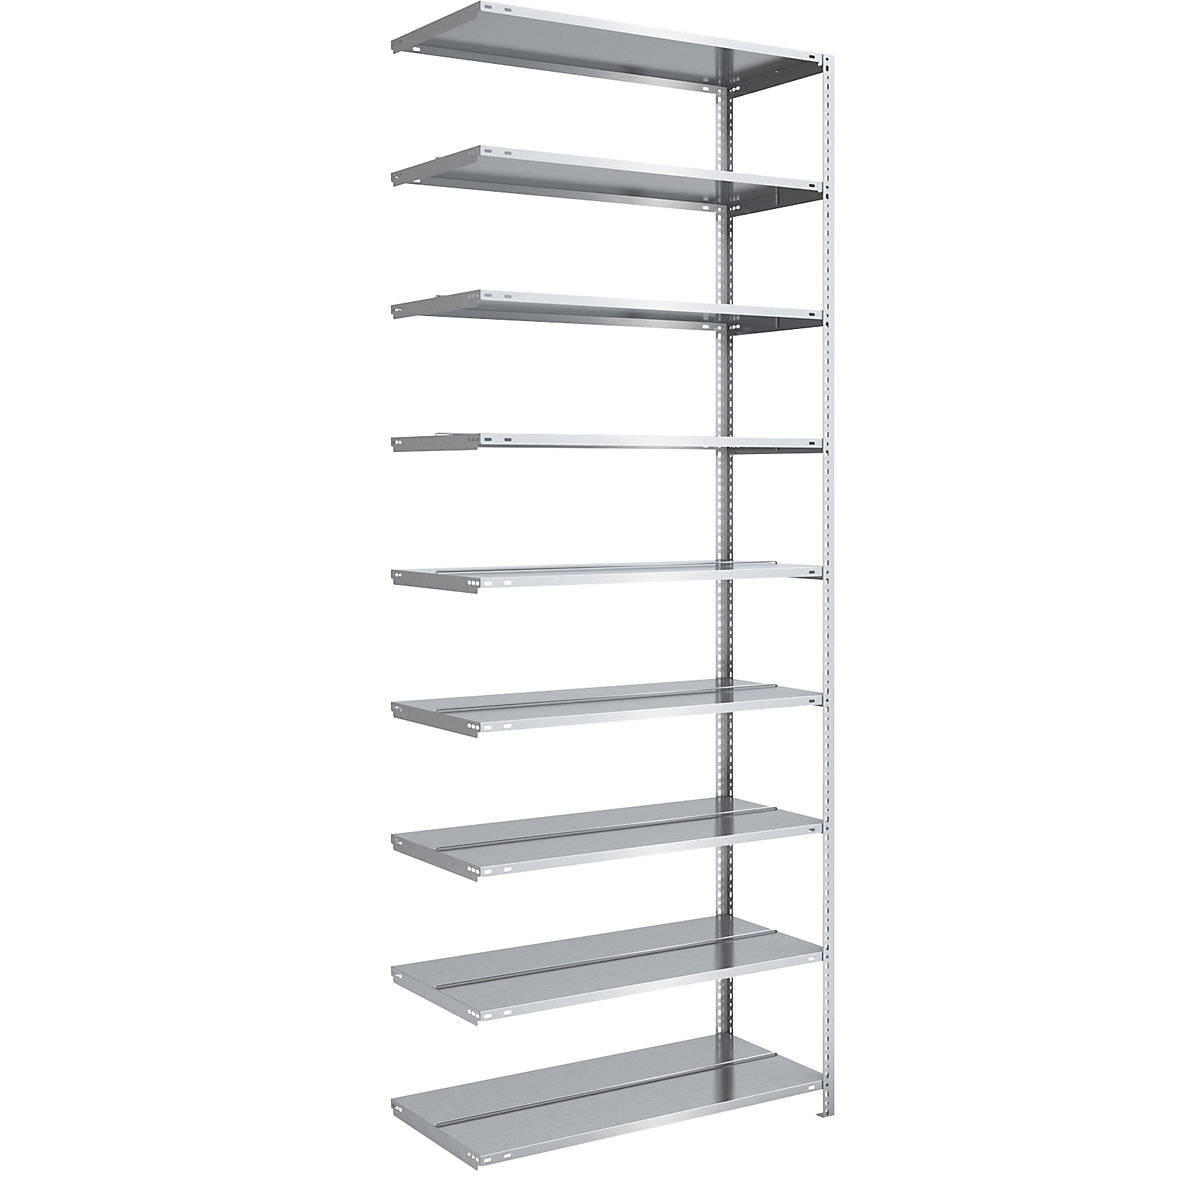 Bolt-together archive shelving, zinc plated – hofe, shelf height 2900 mm, double sided, extension shelf, width x depth 1000 x 600 mm-4